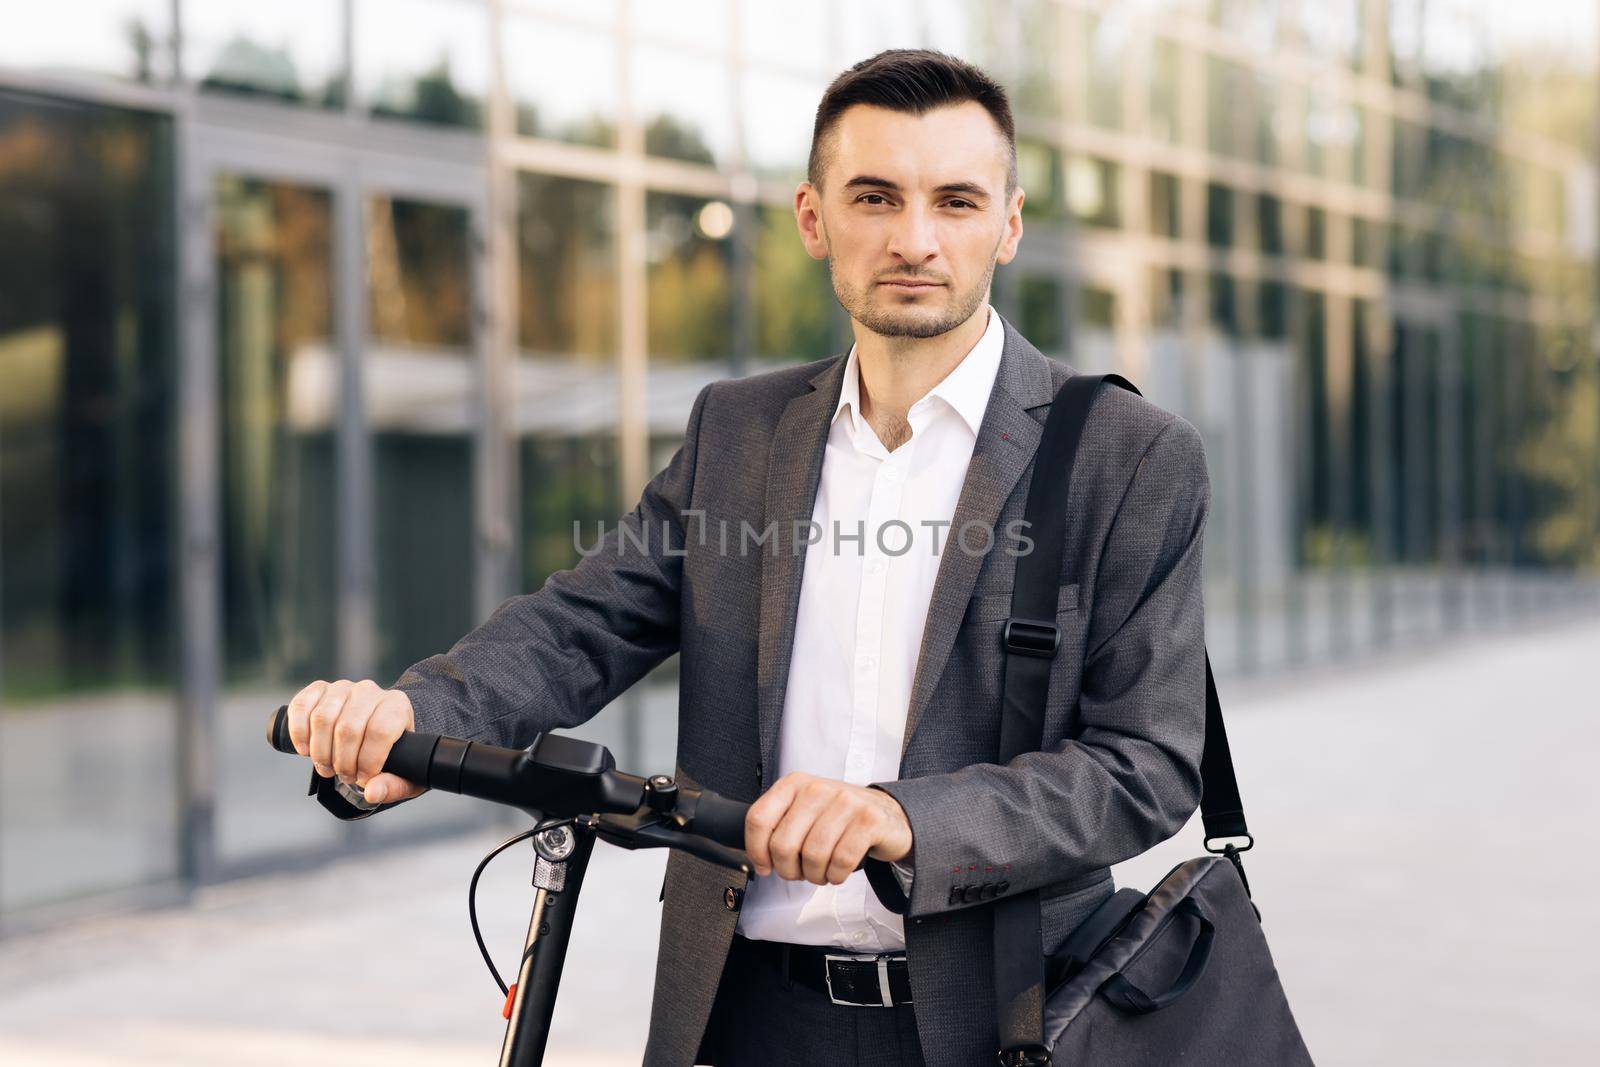 Stylysh man on vehicle outdoors. Modern urban alternative transport. Portrait of confident businessman standing with electric scooter and looking at camera. E-Scooter rider rent personal eco transport.